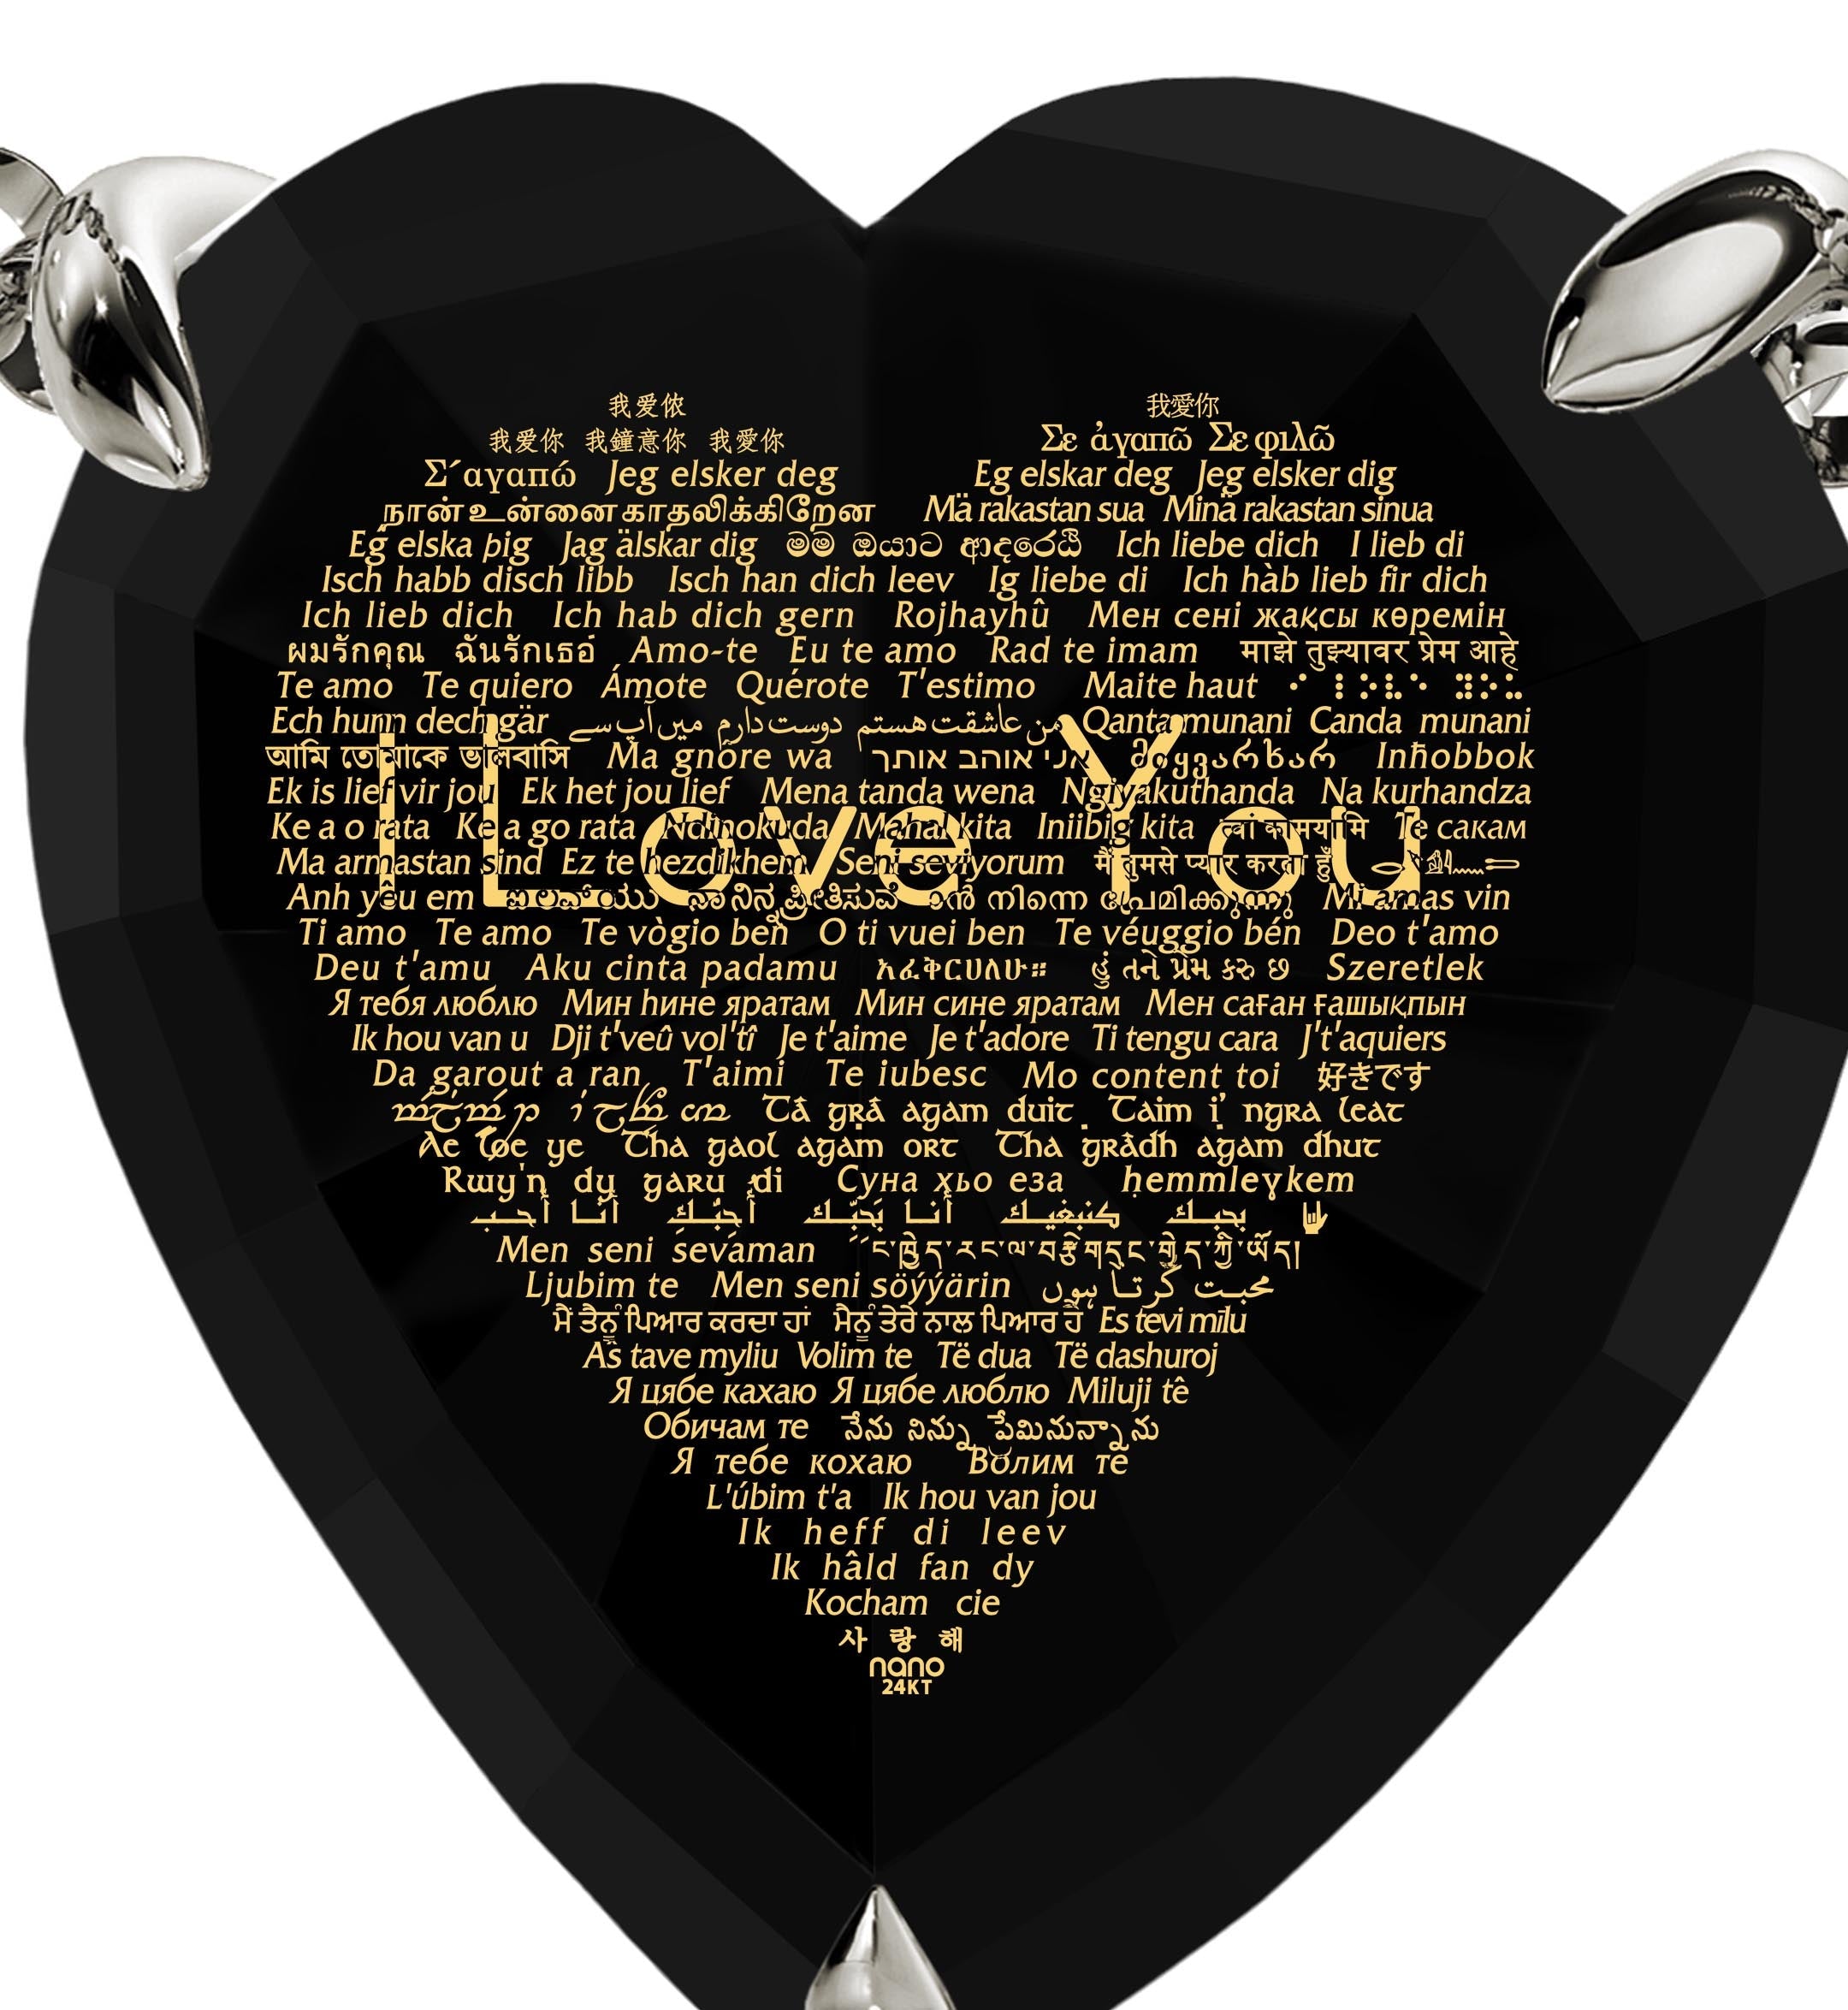 A large, shiny red 925 Sterling Silver Heart Necklace with two metallic chains linked through its top, overlaid with I Love You in 120 Languages in a reflective script.